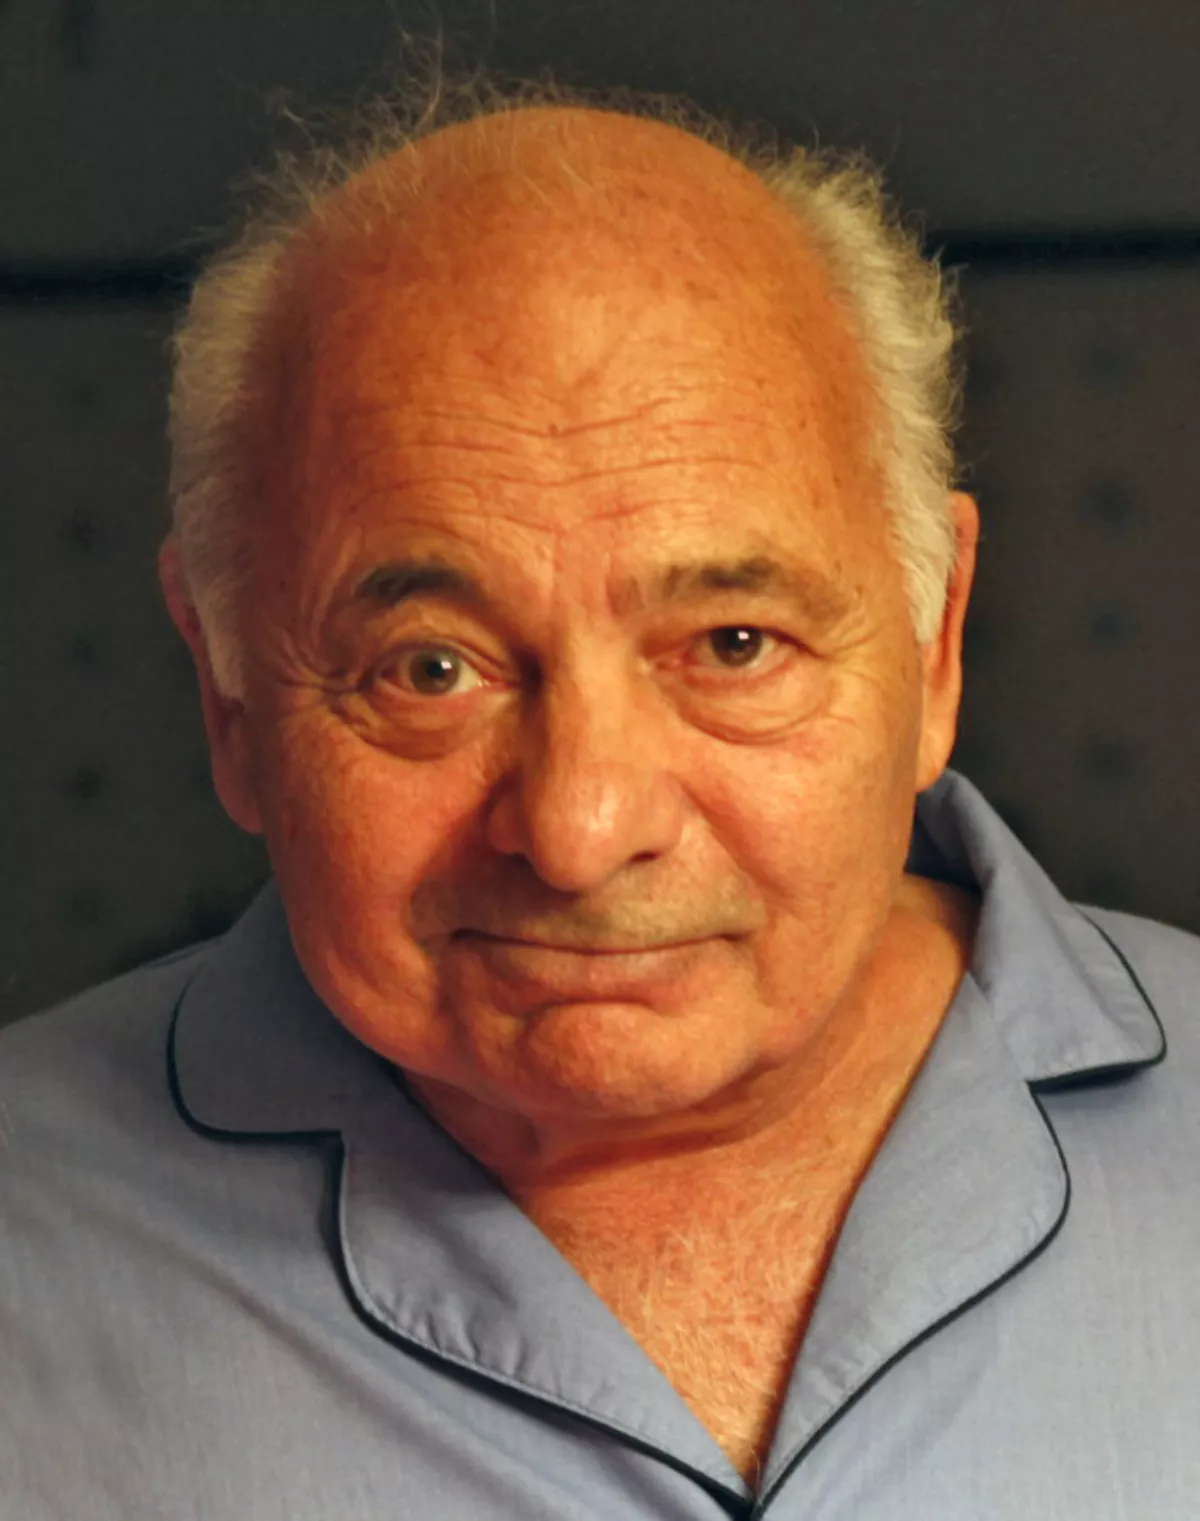 14 Facts About Burt Young | FactSnippet